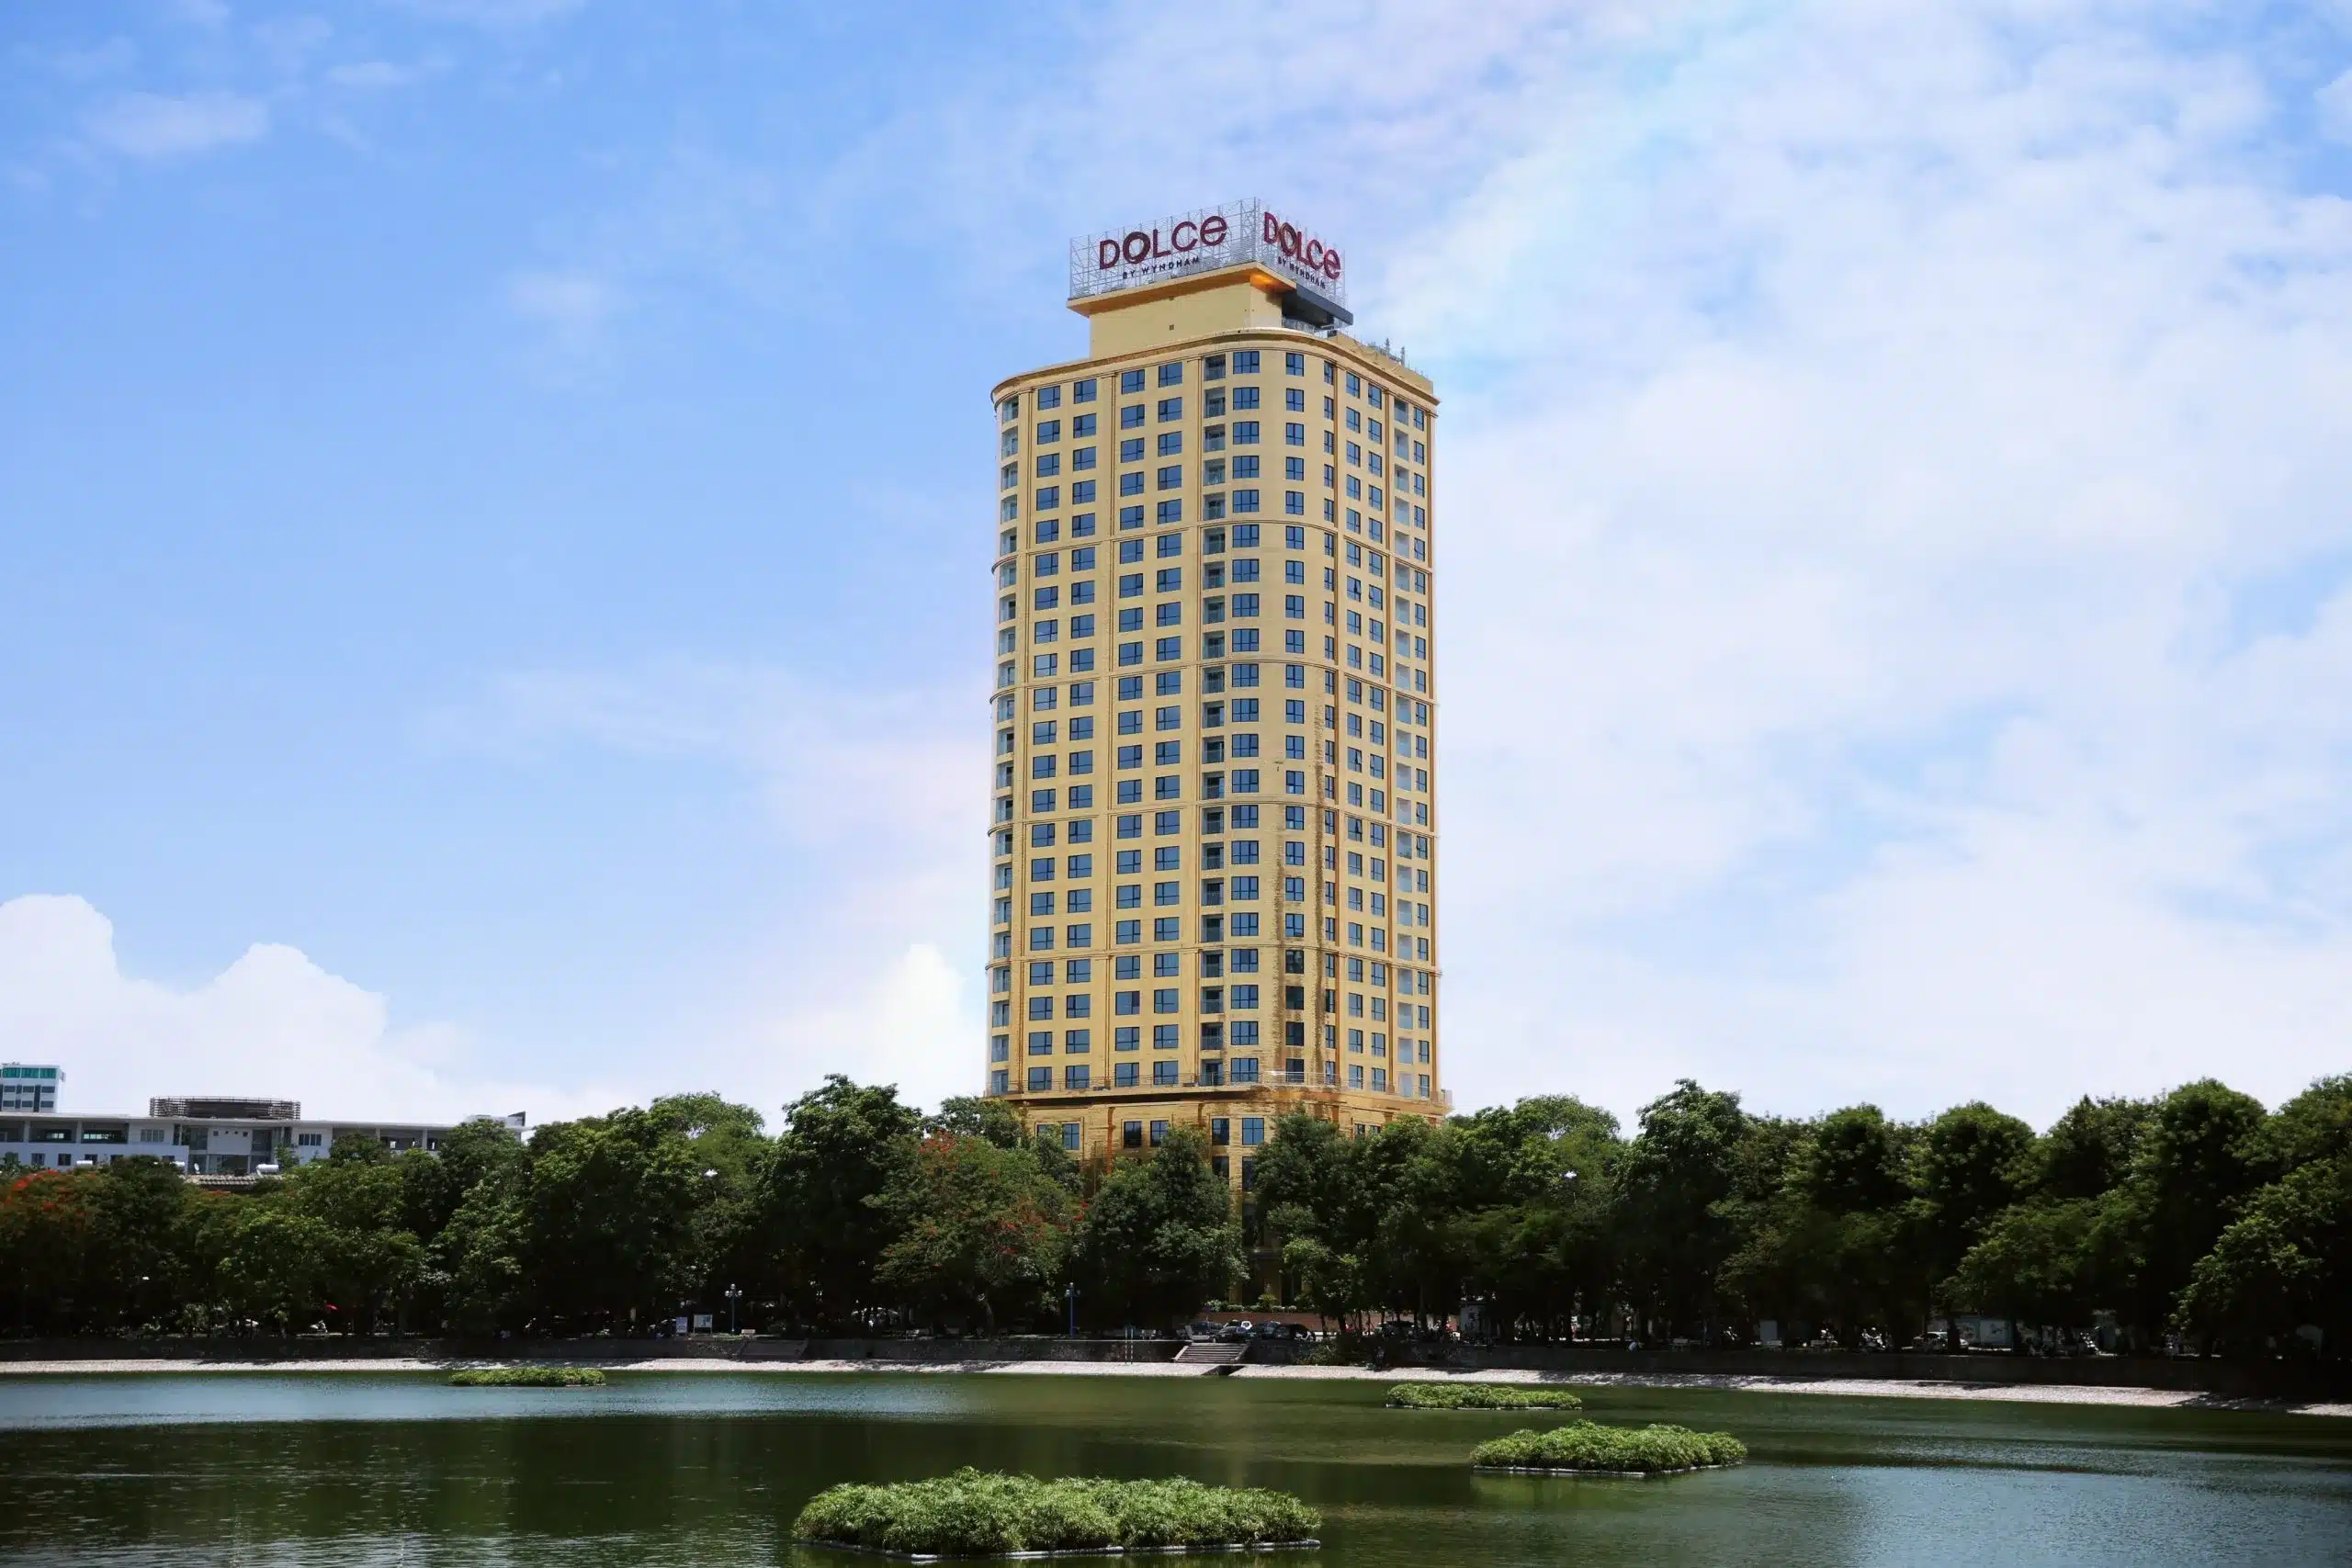 World’s first gold-plated hotel opens in Vietnam with interior and exterior in 24-karat gold